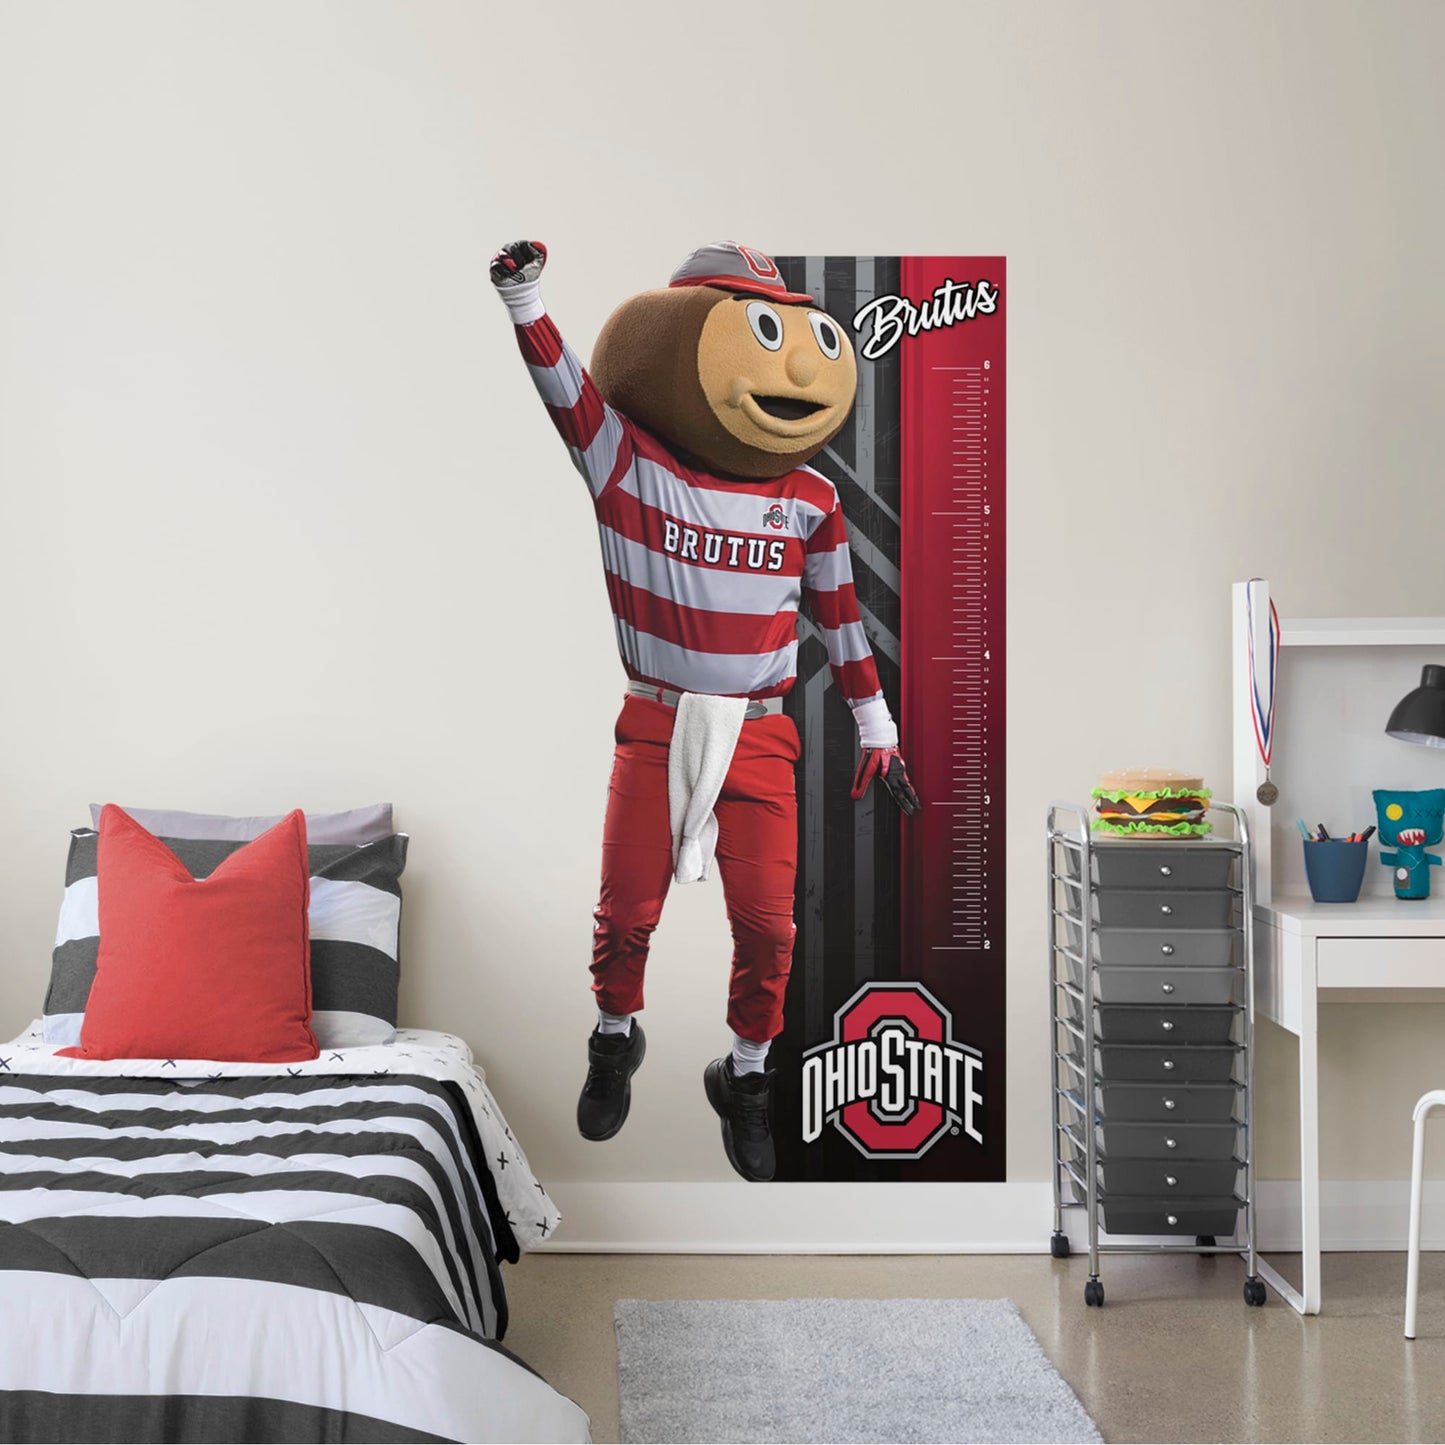 Ohio State Buckeyes: Brutus Buckeye Mascot Growth Chart - Officially Licensed Removable Wall Decal